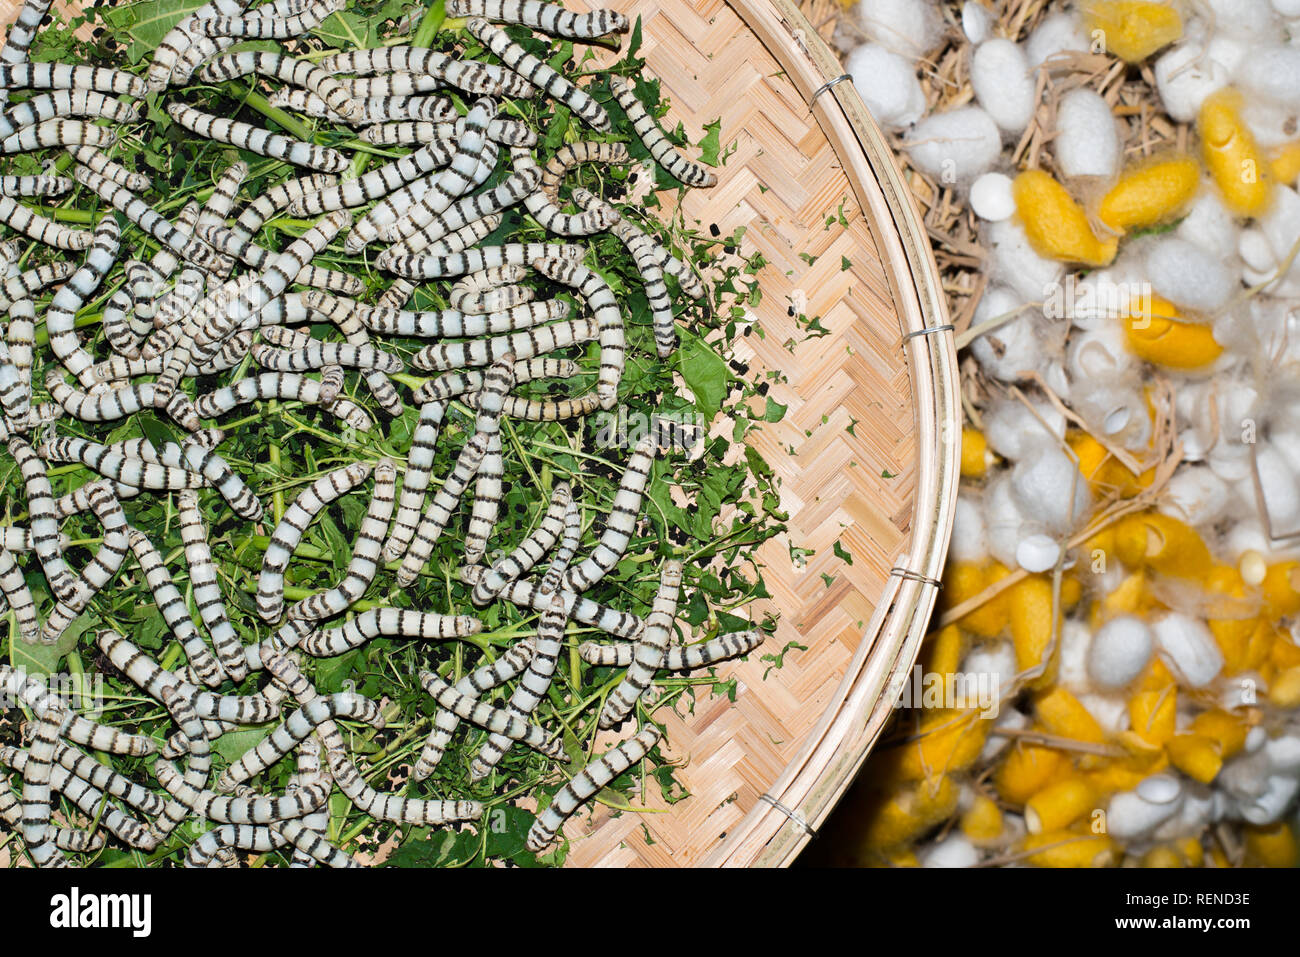 Silkworms eat mulberry leaves on a wicker tray next to empty silk cocoons. Bangkok, Thailand. Stock Photo